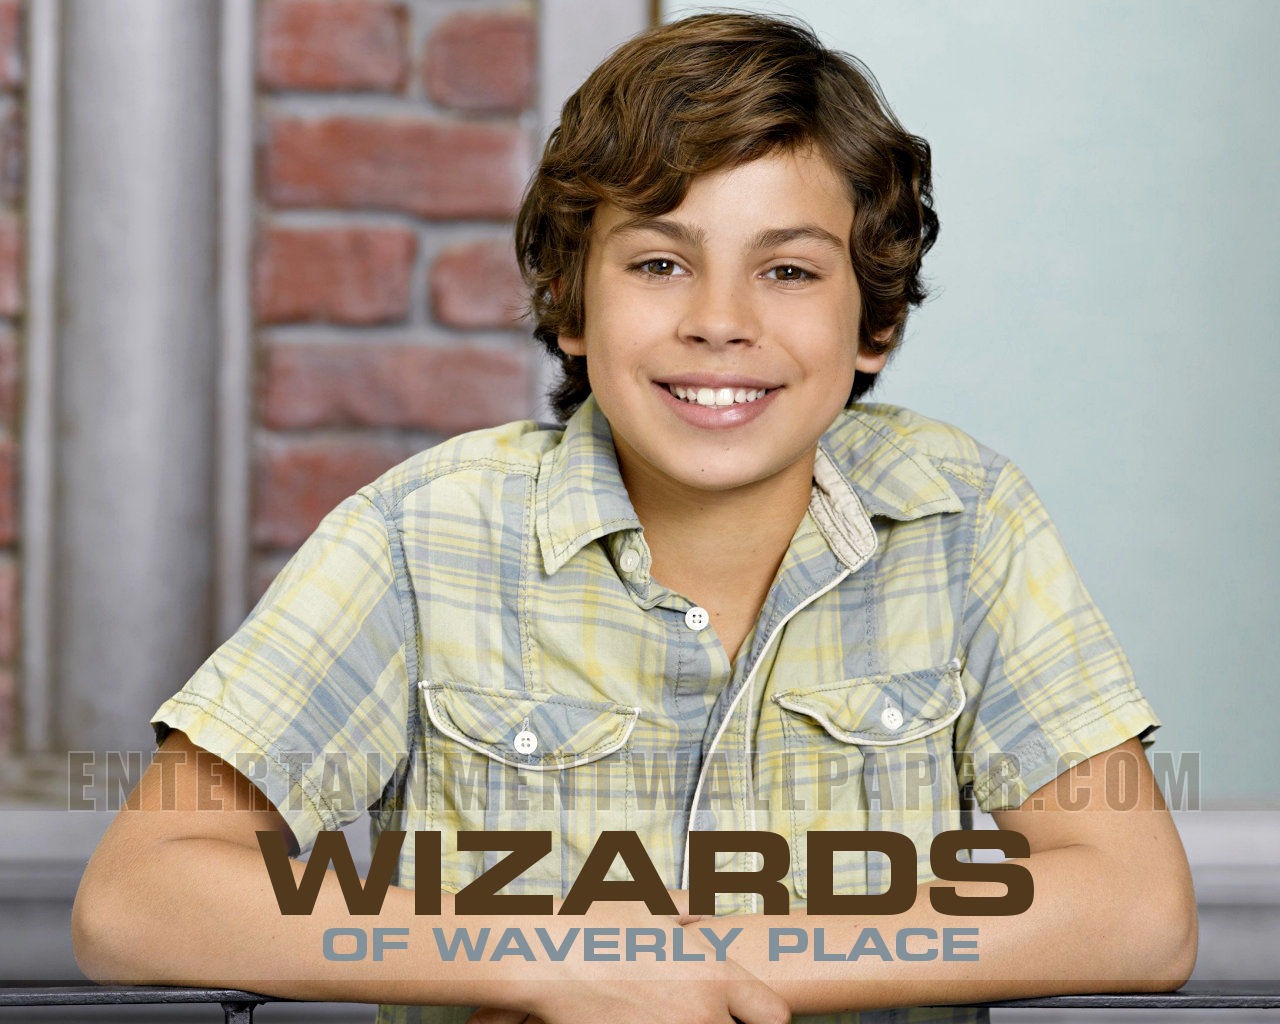 Wizards of Waverly Place 少年魔法師 #18 - 1280x1024